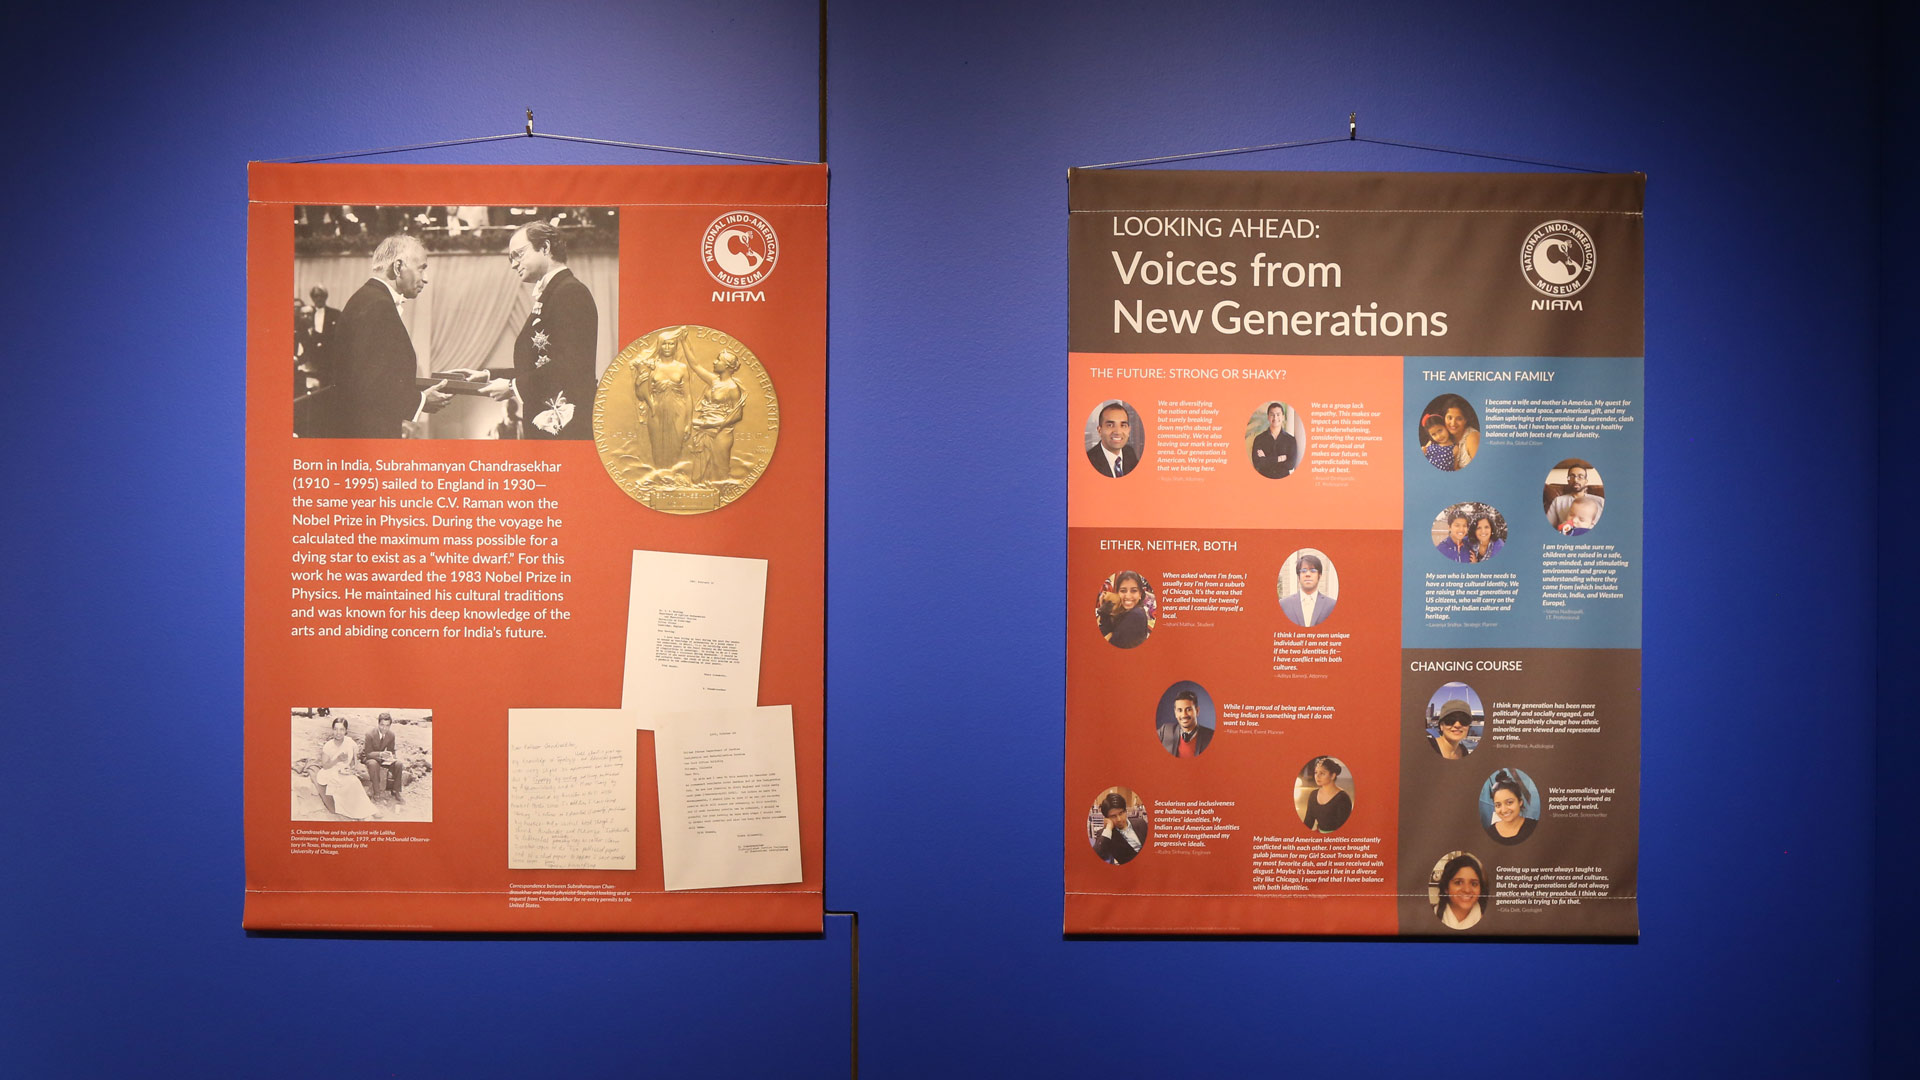 pictures on the wall with a heading of 'voices from new generations'